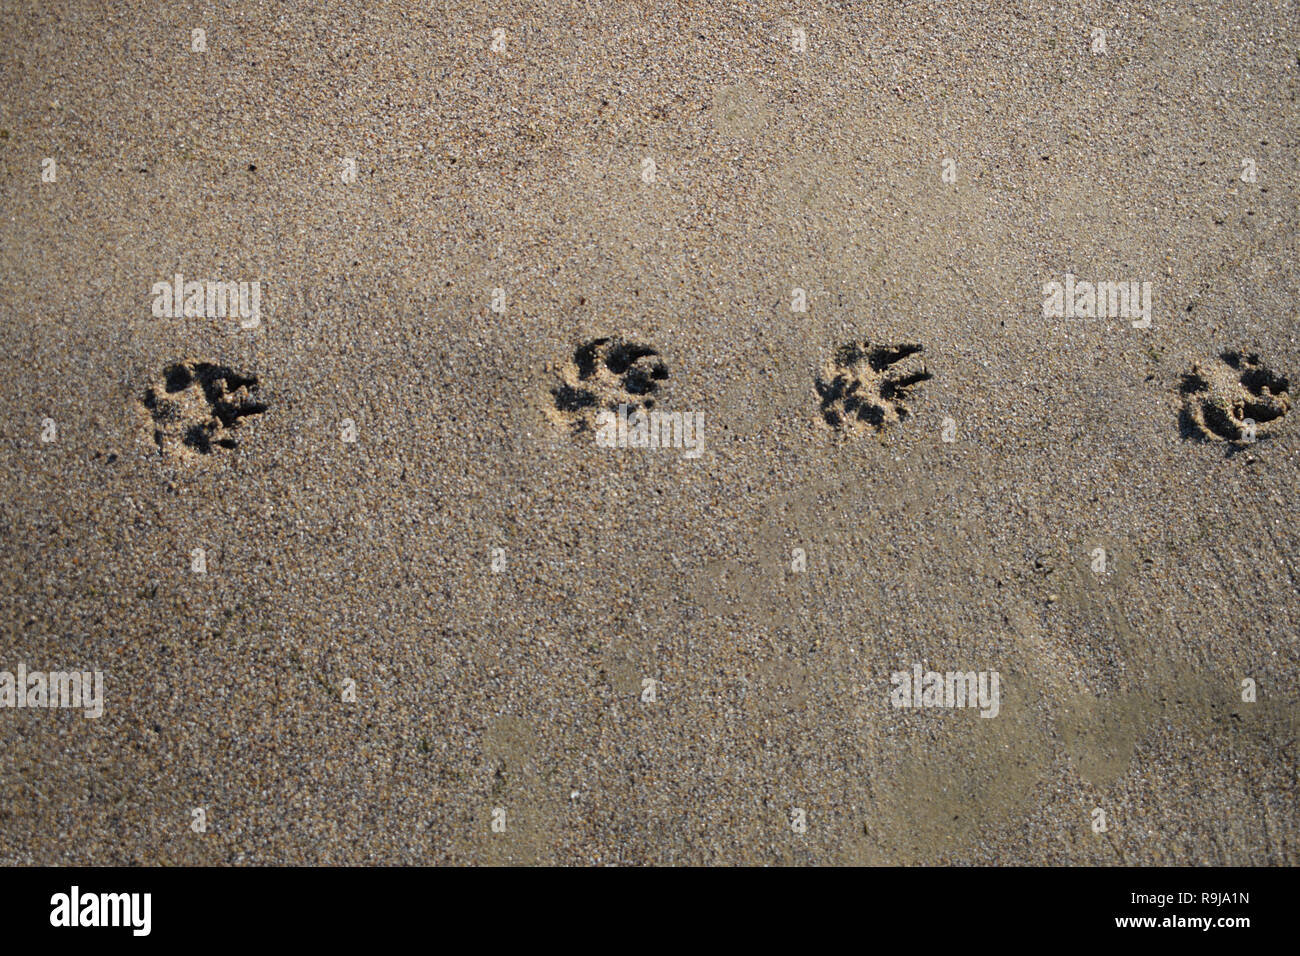 traces of paws and hands on the sand. dog tracks, human tracks Stock Photo